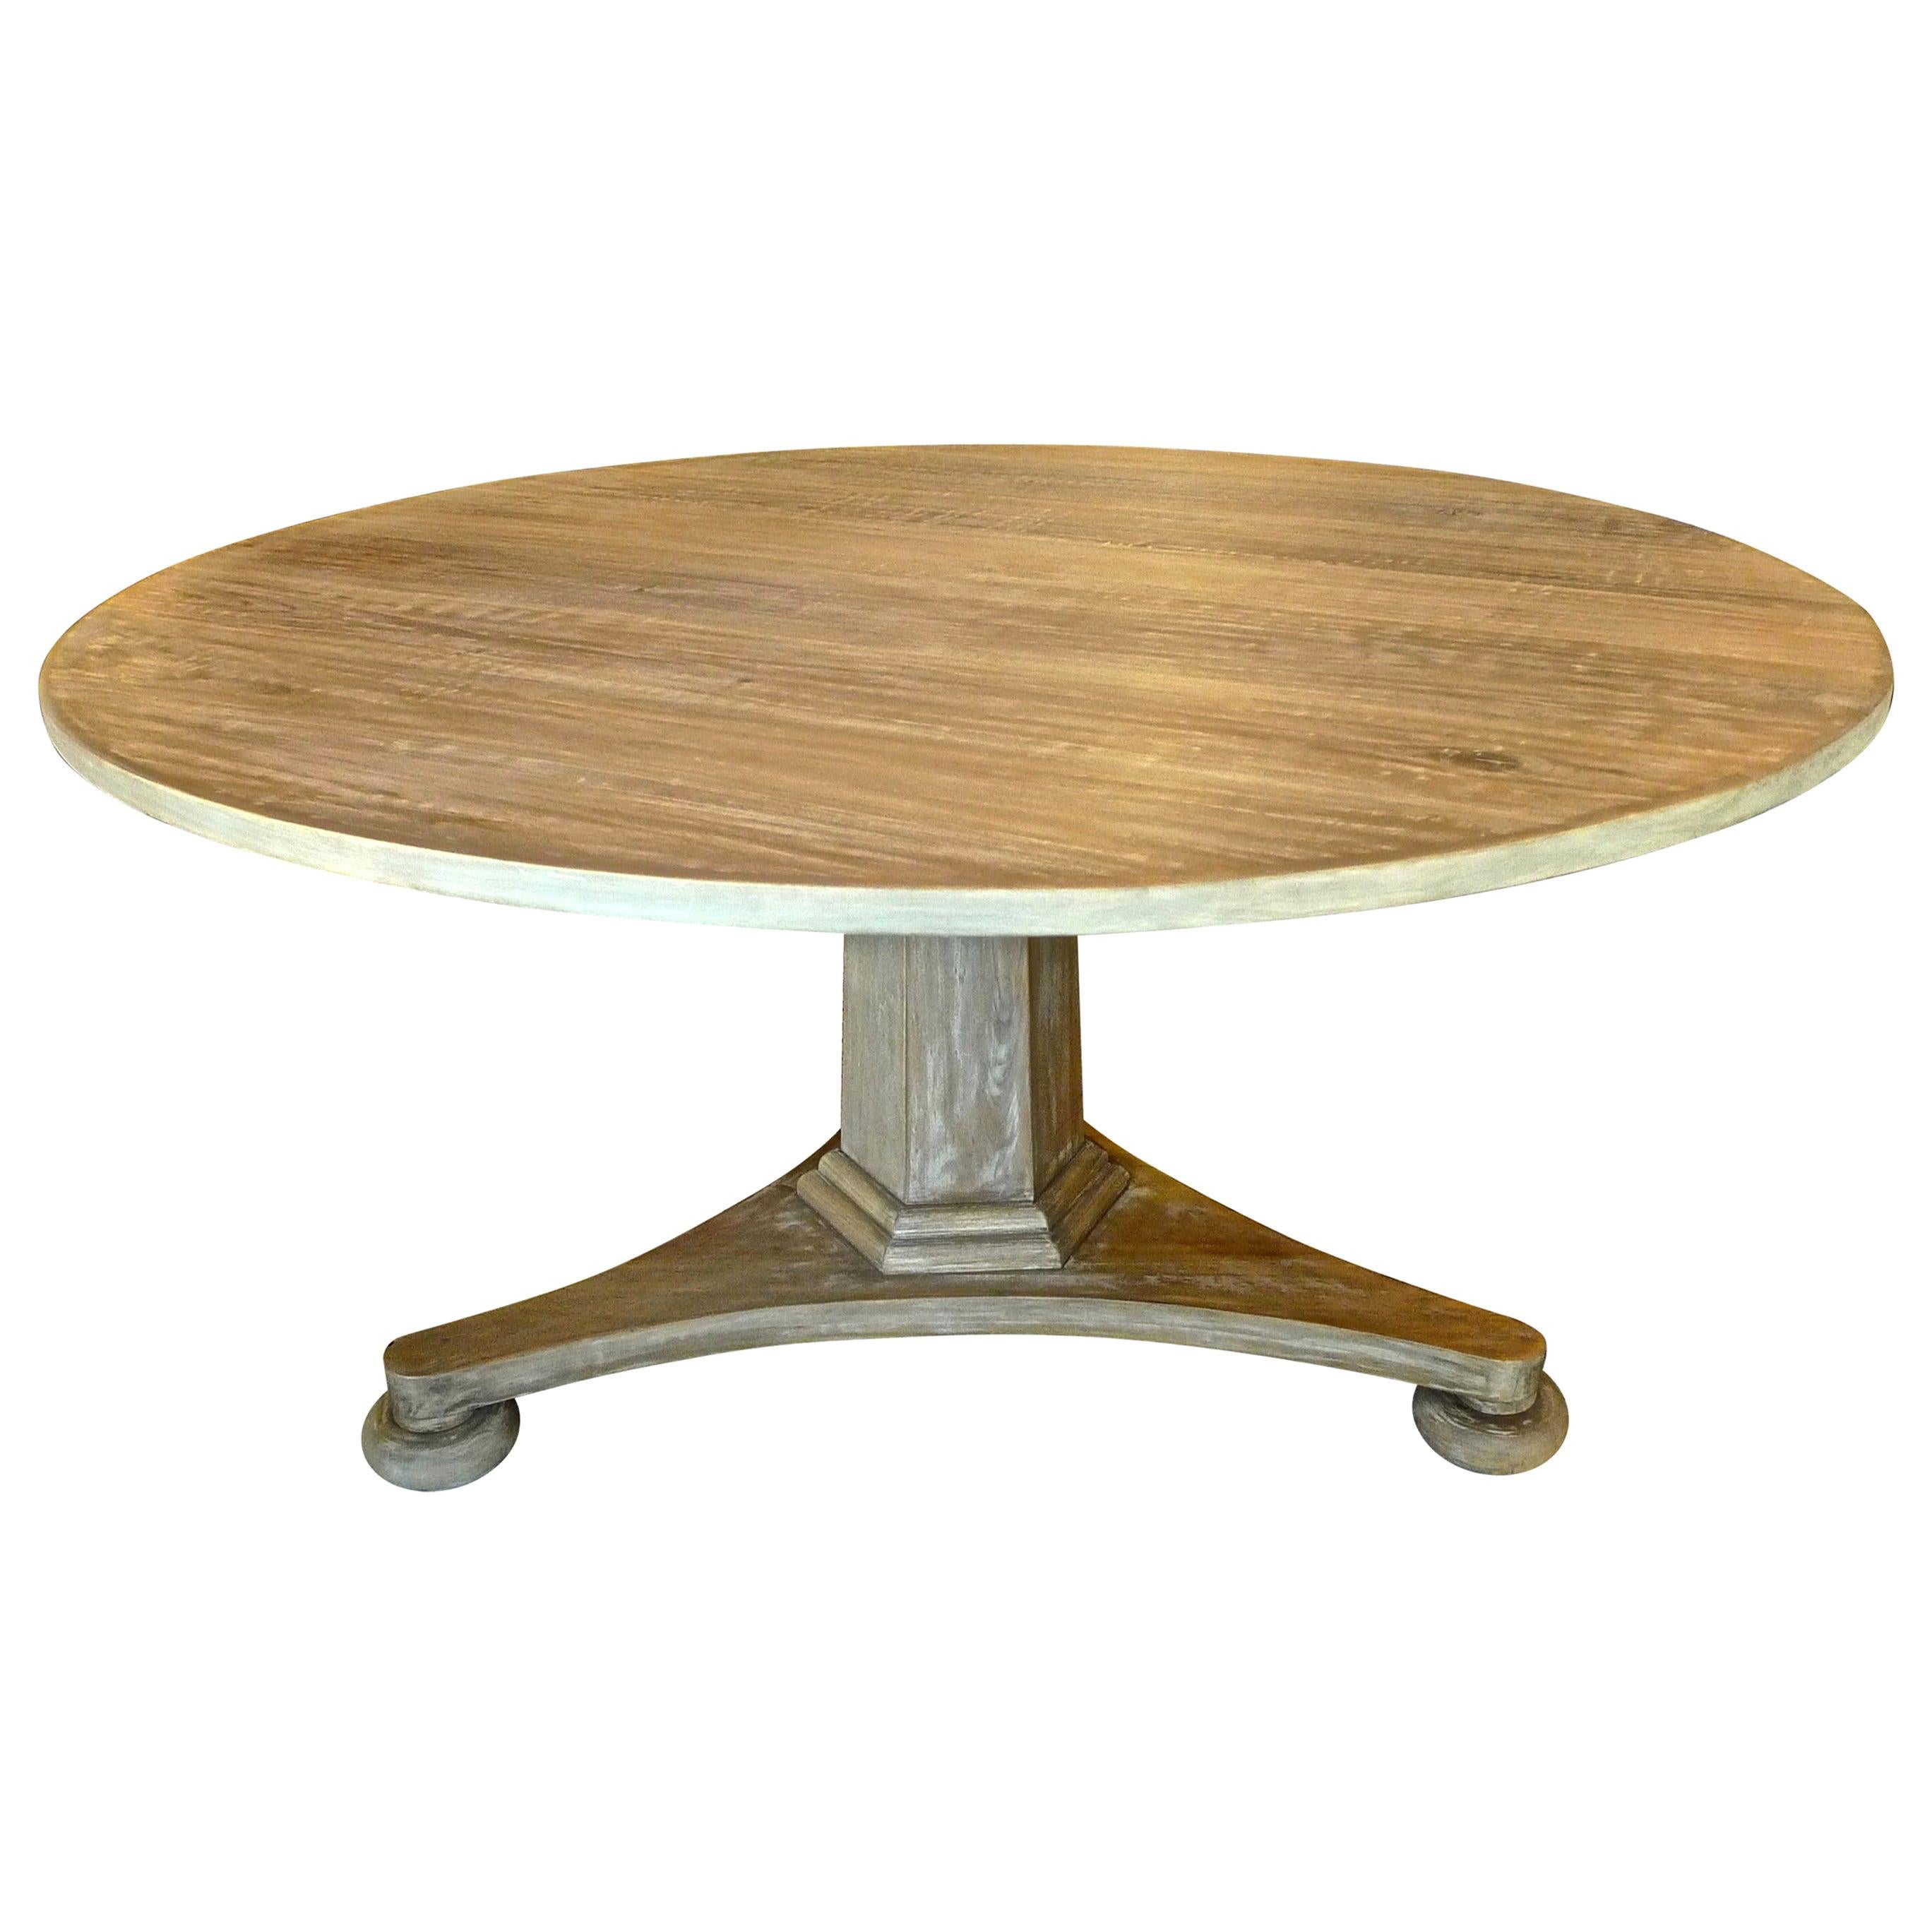 Swedish Style Contemporary Alder-Wood Round Pedestal Table